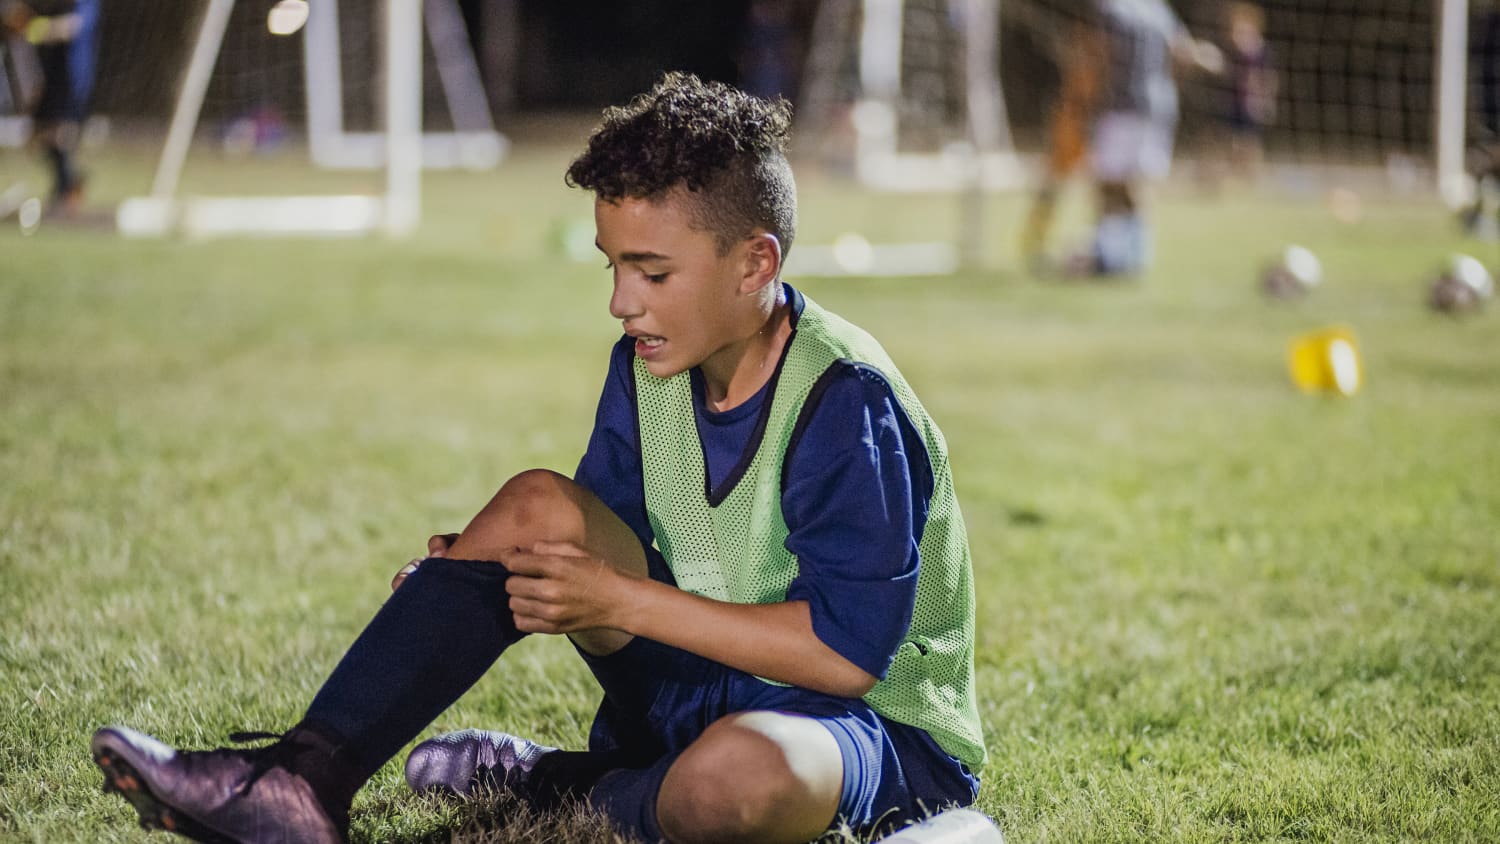 A boy injures himself, with possibly a growth plate injury, playing soccer.